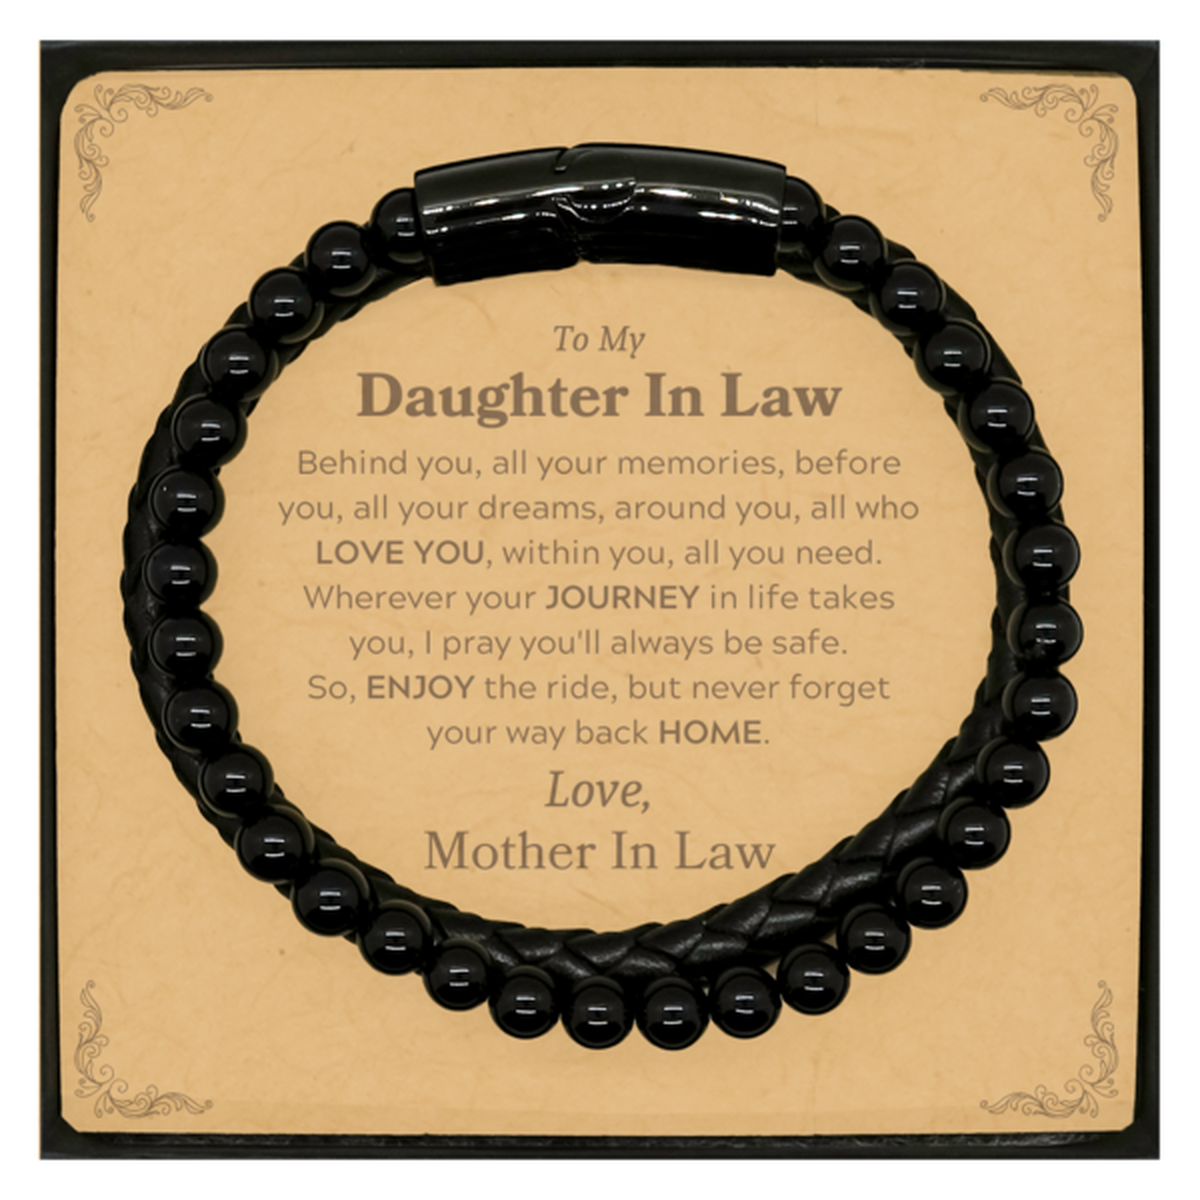 To My Daughter In Law Graduation Gifts from Mother In Law, Daughter In Law Stone Leather Bracelets Christmas Birthday Gifts for Daughter In Law Behind you, all your memories, before you, all your dreams. Love, Mother In Law